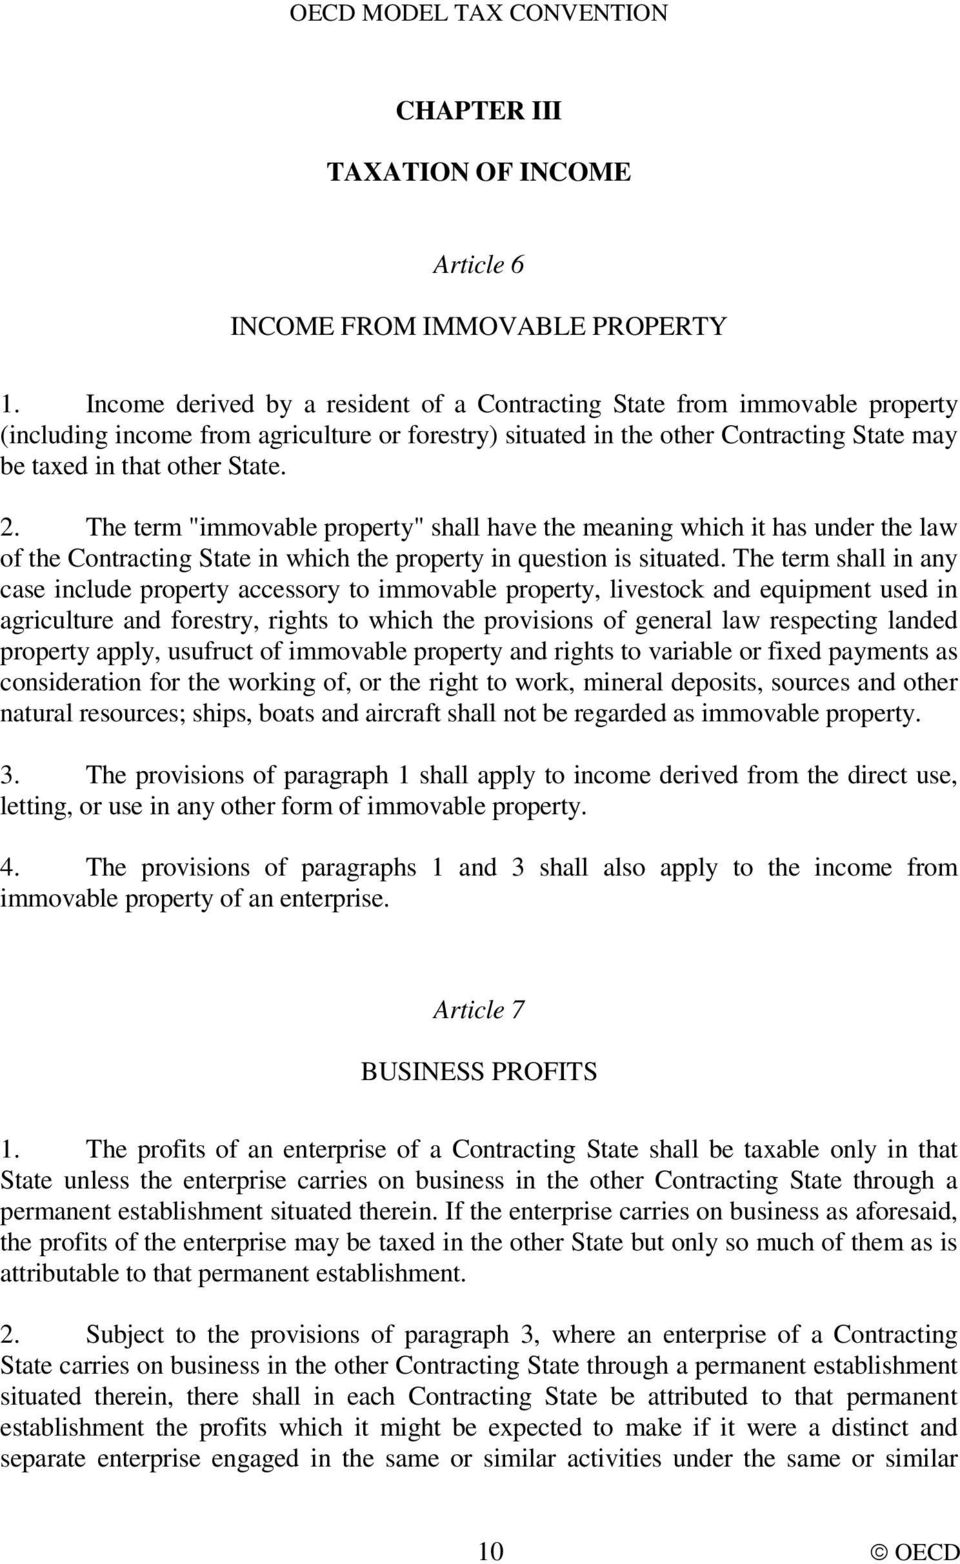 The term "immovable property" shall have the meaning which it has under the law of the Contracting State in which the property in question is situated.